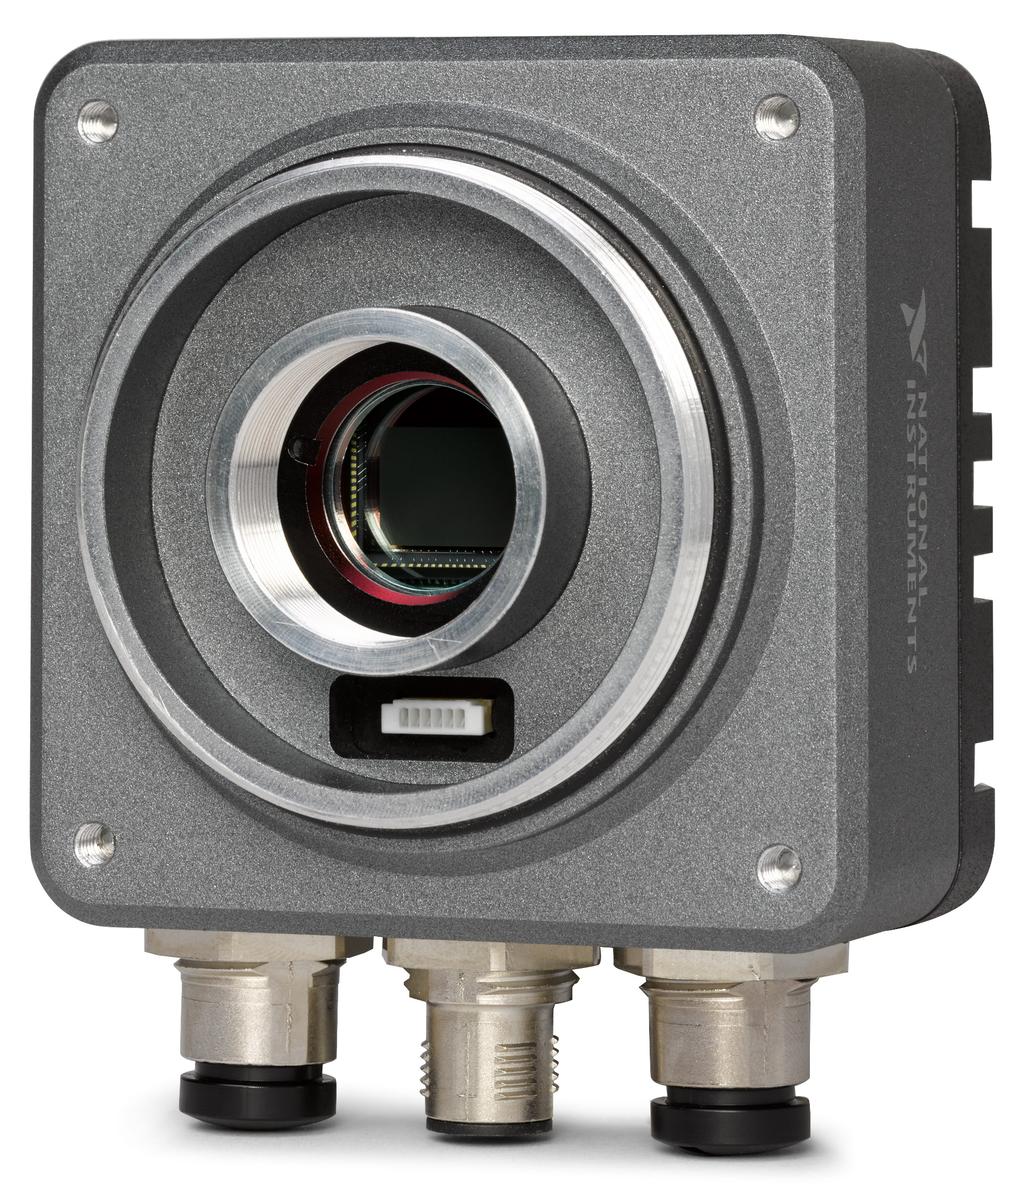 With resolutions ranging from VGA (640 x 480) to 5.3 MP (2592 x 2048), frame rates up to 293 fps, and color and monochrome options, these cameras can be used in a wide range of applications. Figure 1.